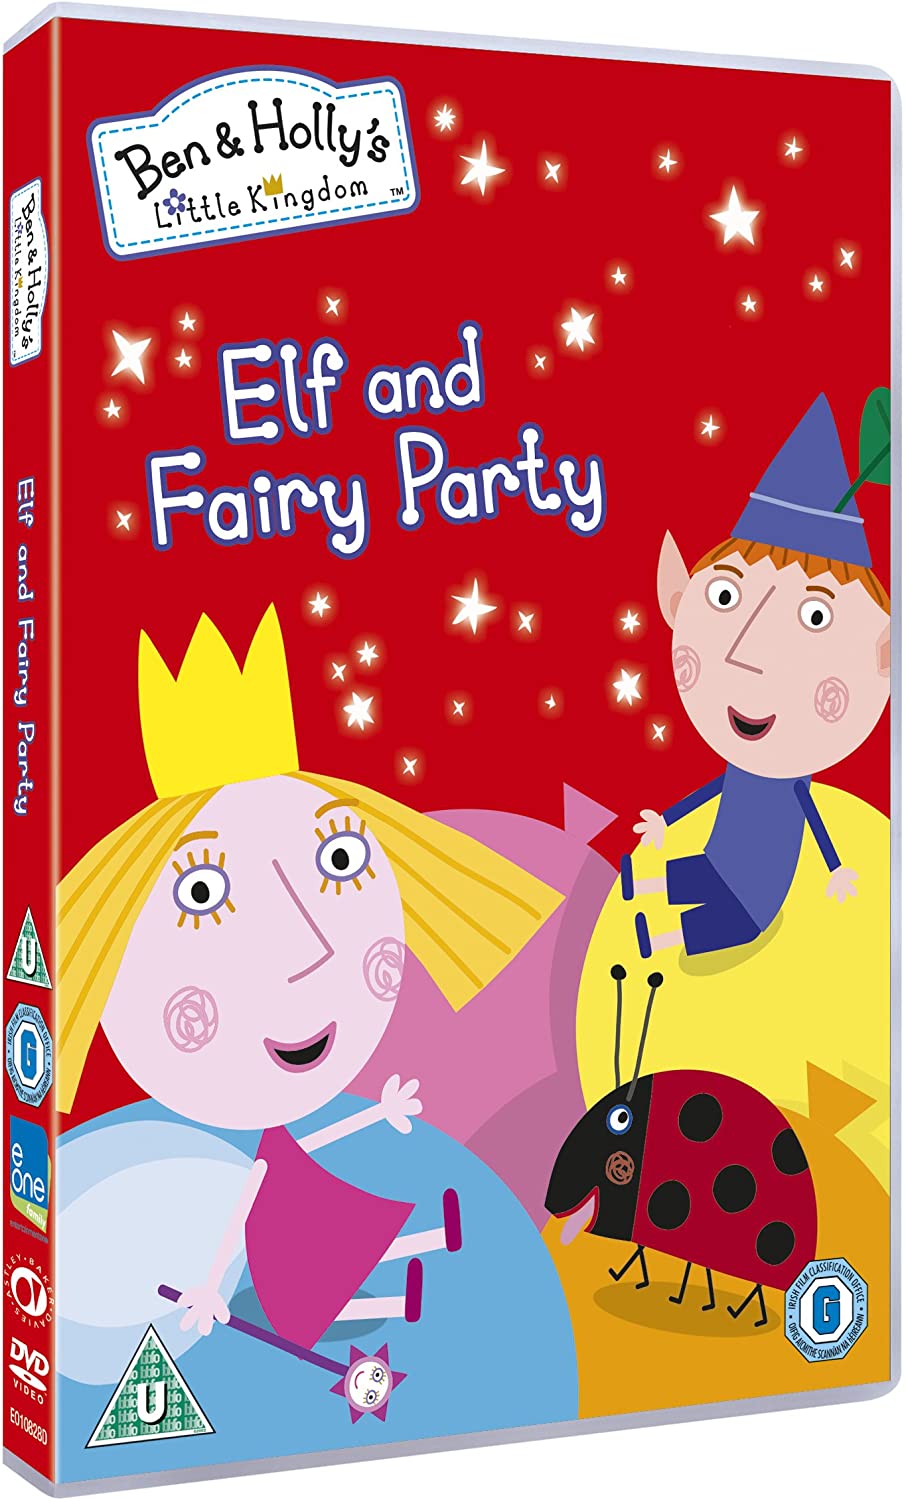 Ben & Holly's Little Kingdom: Elf and Fairy Party